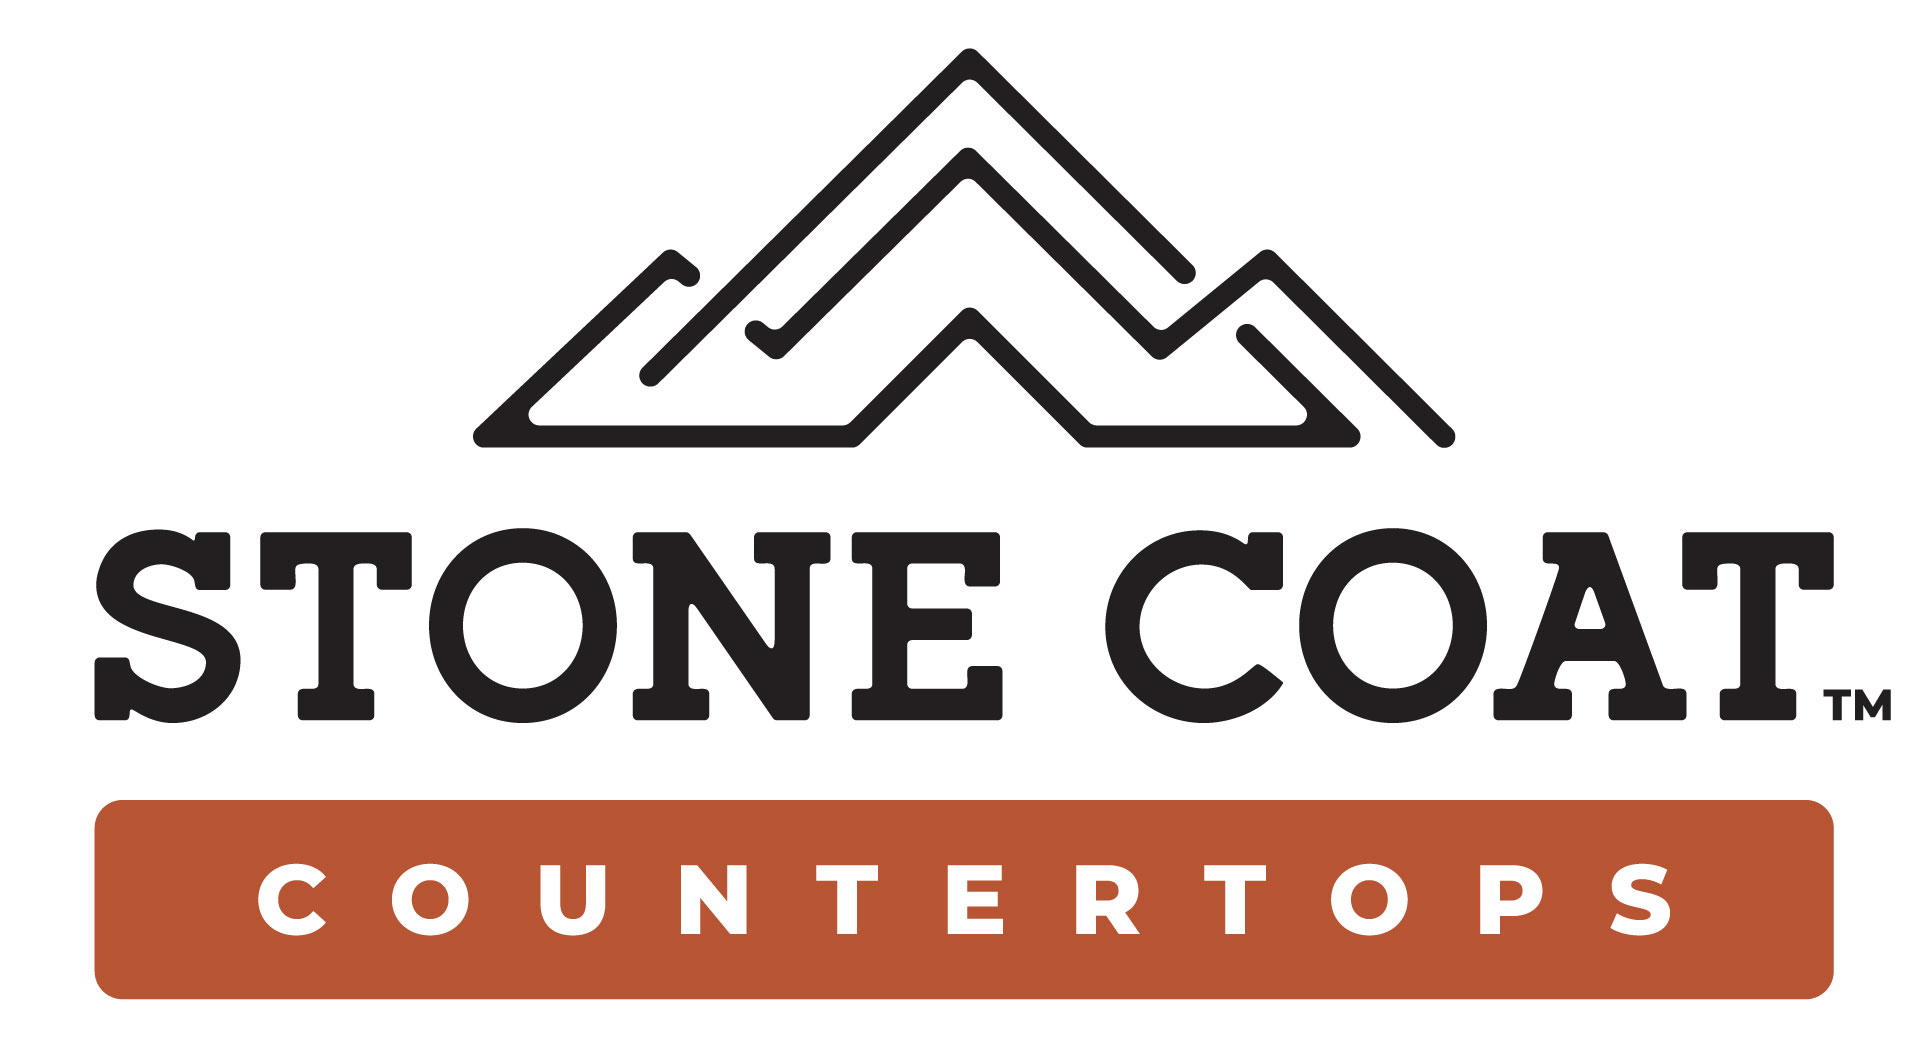 We wanted to share this - Stonecoatcountertops.com